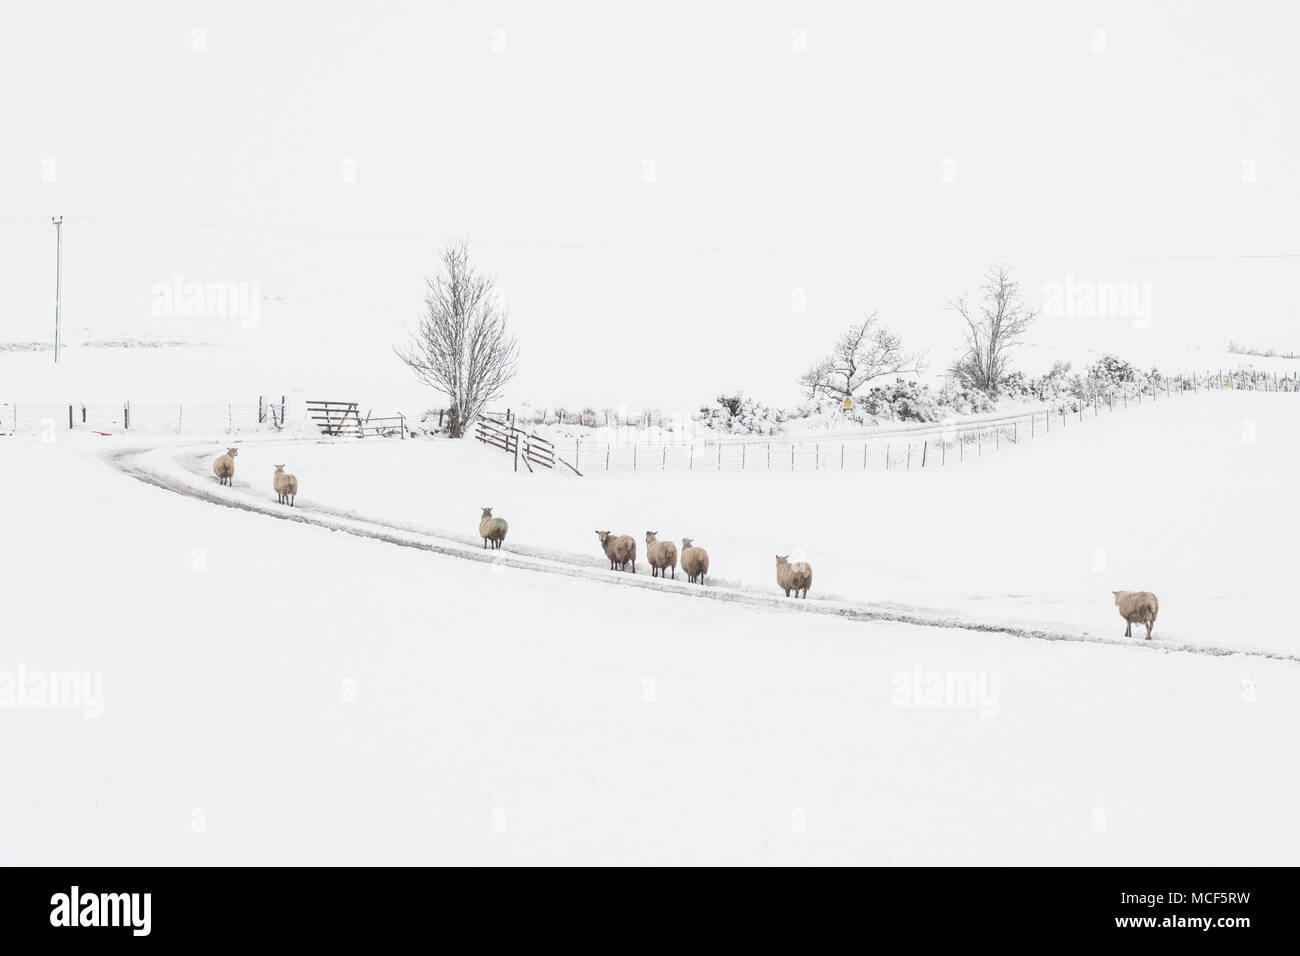 sheep in a line walking on track in snow Stock Photo